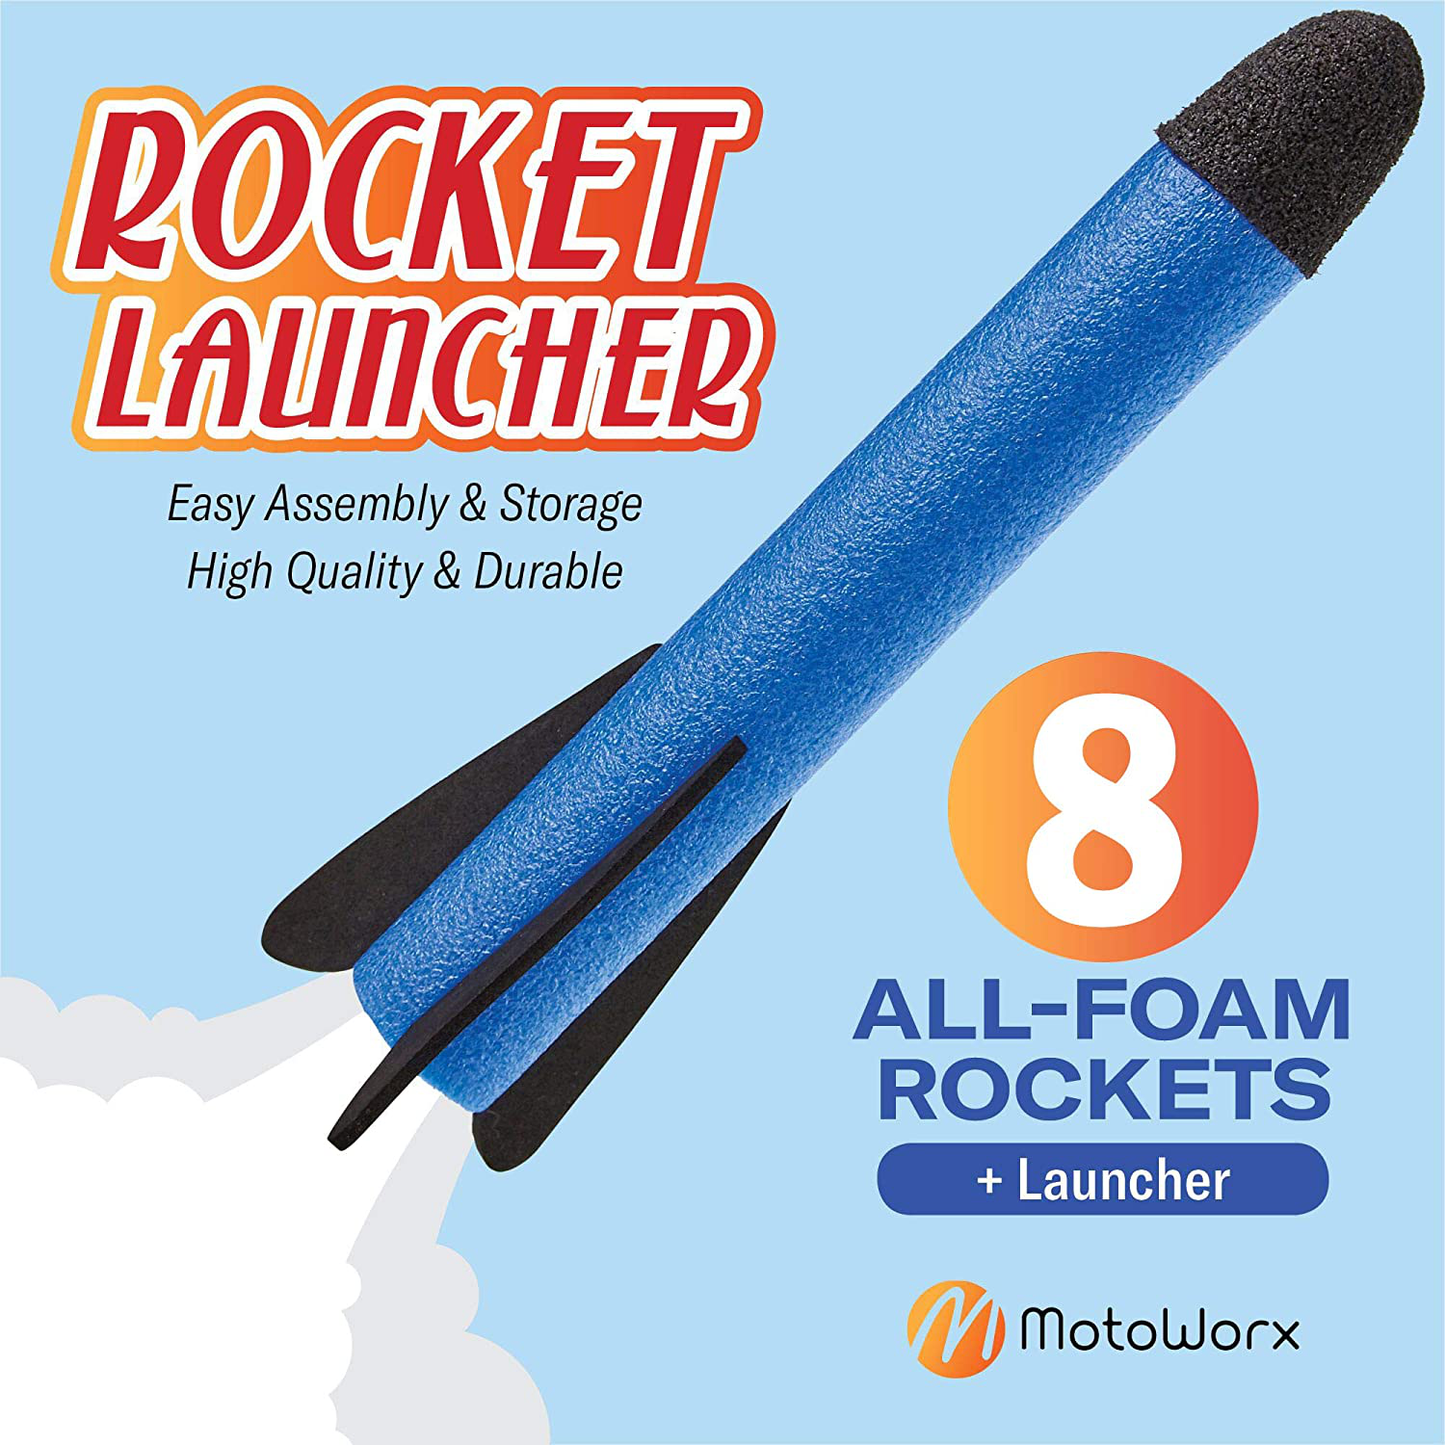 Toy Rocket Launcher for kids – Shoots Up to 100 Feet – 8 Colorful Foam Rockets and Sturdy Launcher Stand With Foot Launch Pad - Fun Outdoor Toy for Kids - Gift Toys for Boys and Girls Age 3+ Years Old